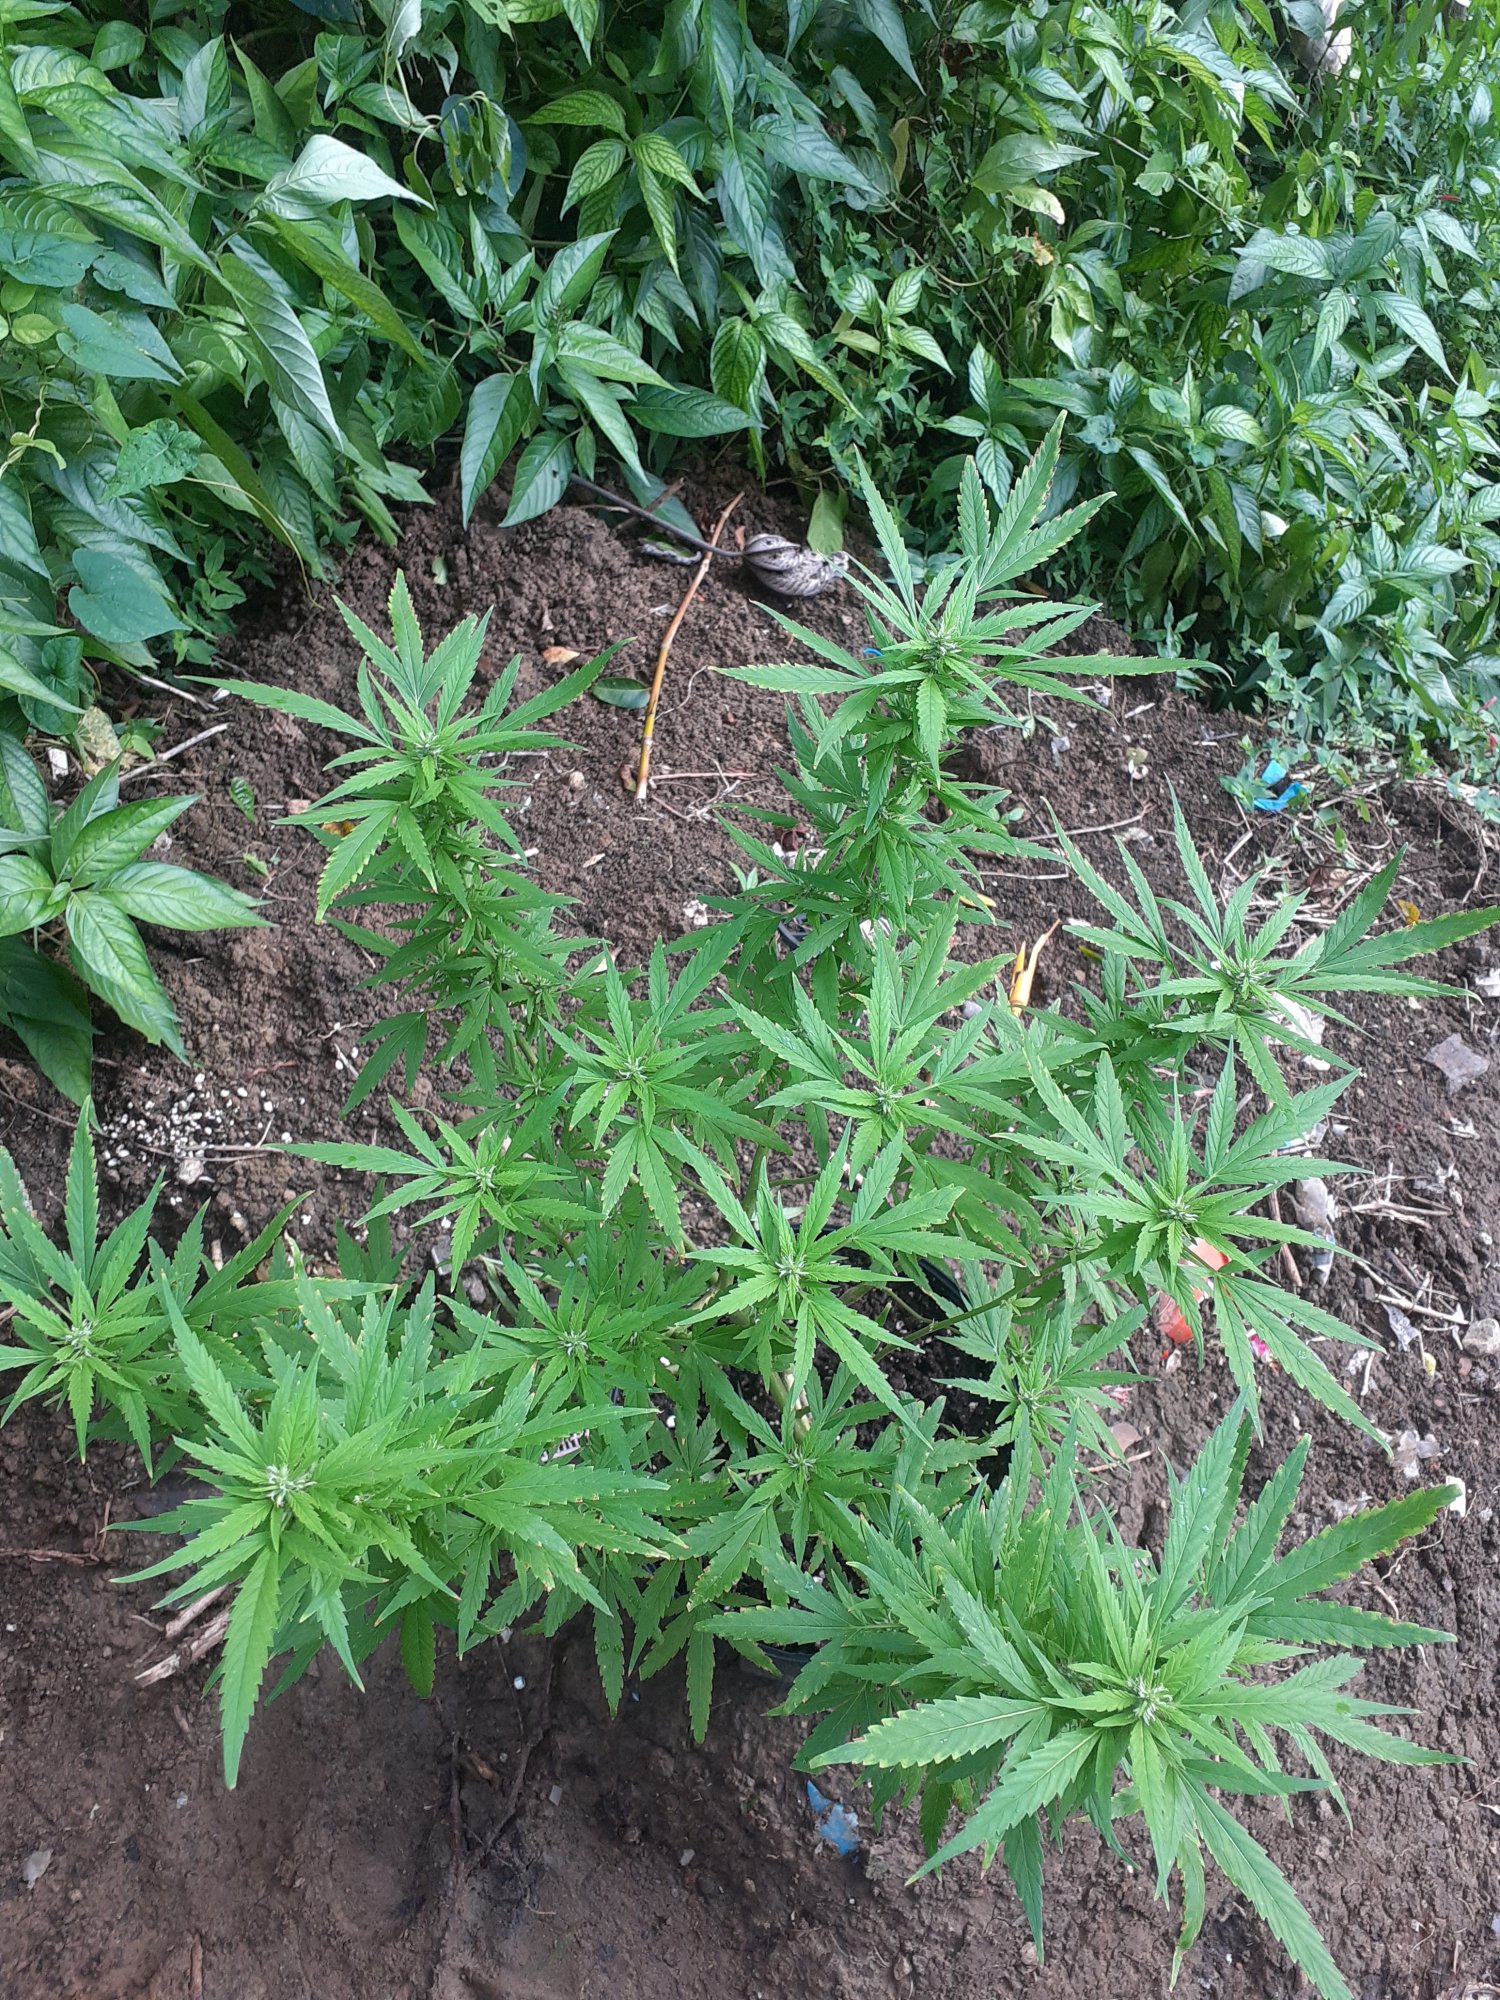 First time growing marijuana what are your thoughts 5